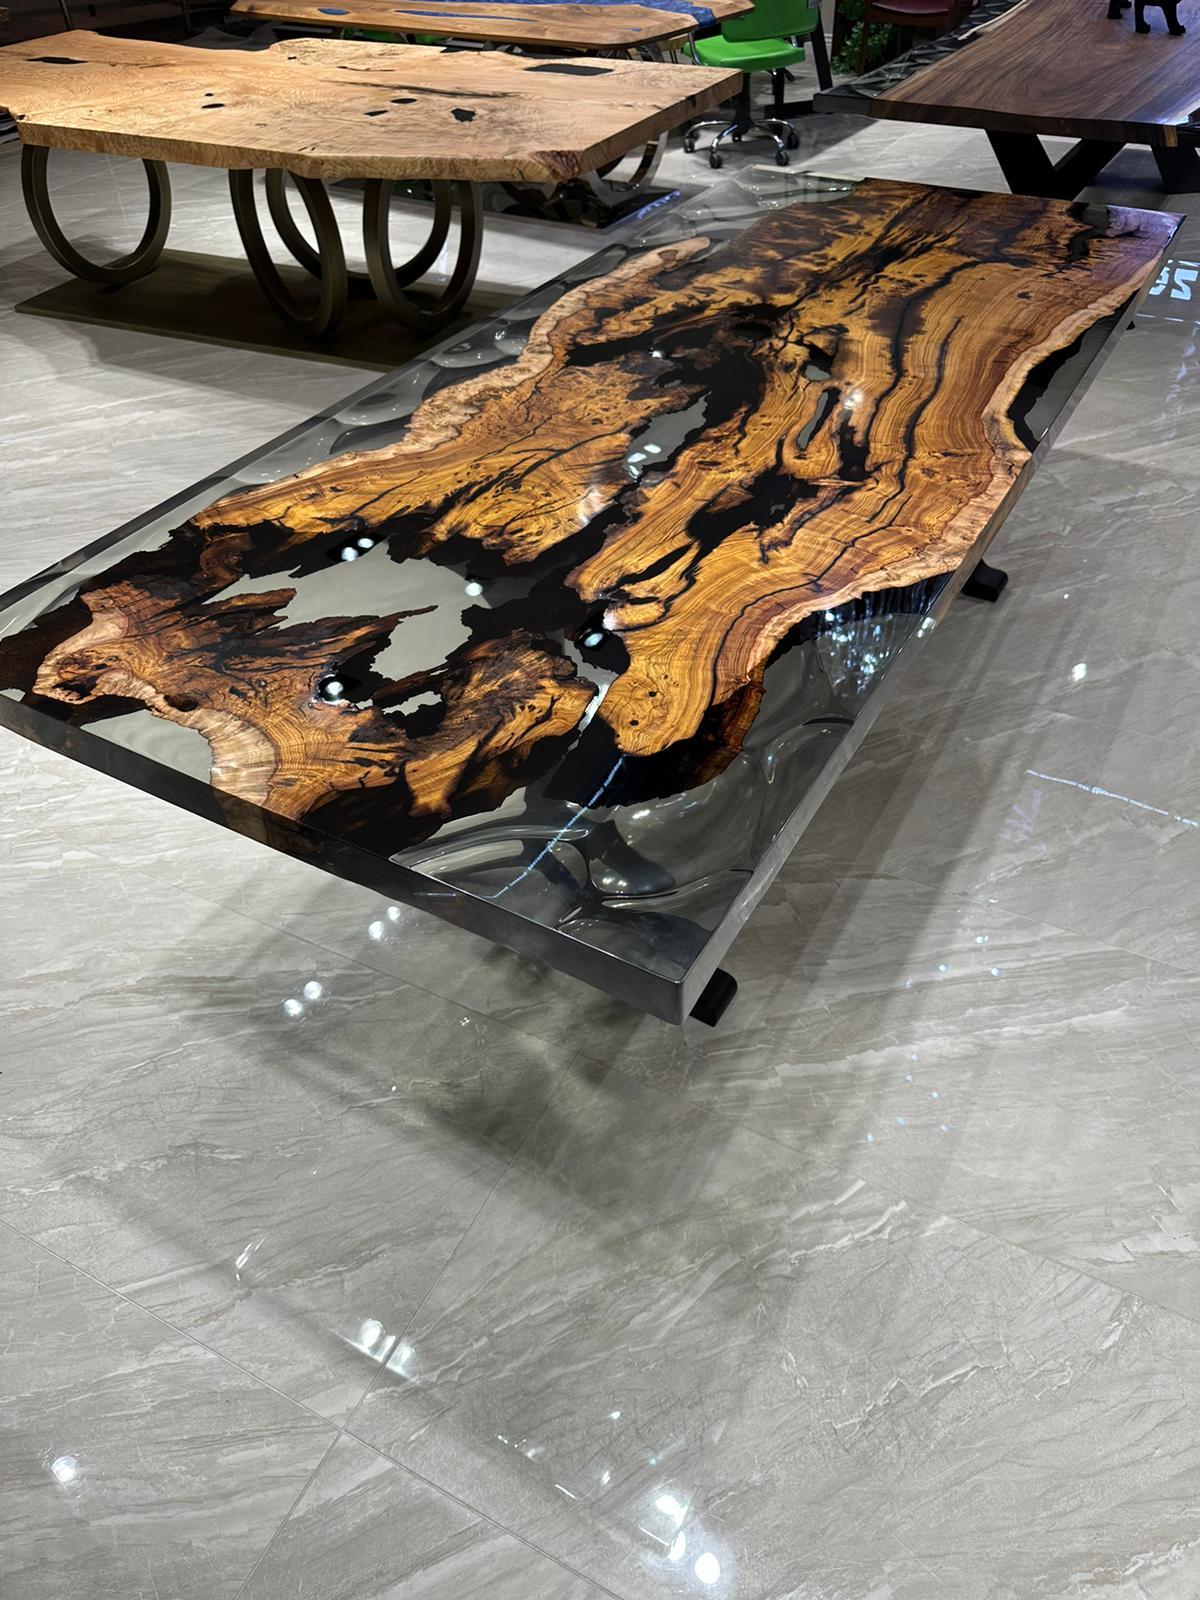 Hackberry Wave Epoxy Table

This table is made of one-piece natural hackberry slab. We brought together black transparent epoxy with the unique structure of the hackberry slab.

It can be made in any size you wish! 